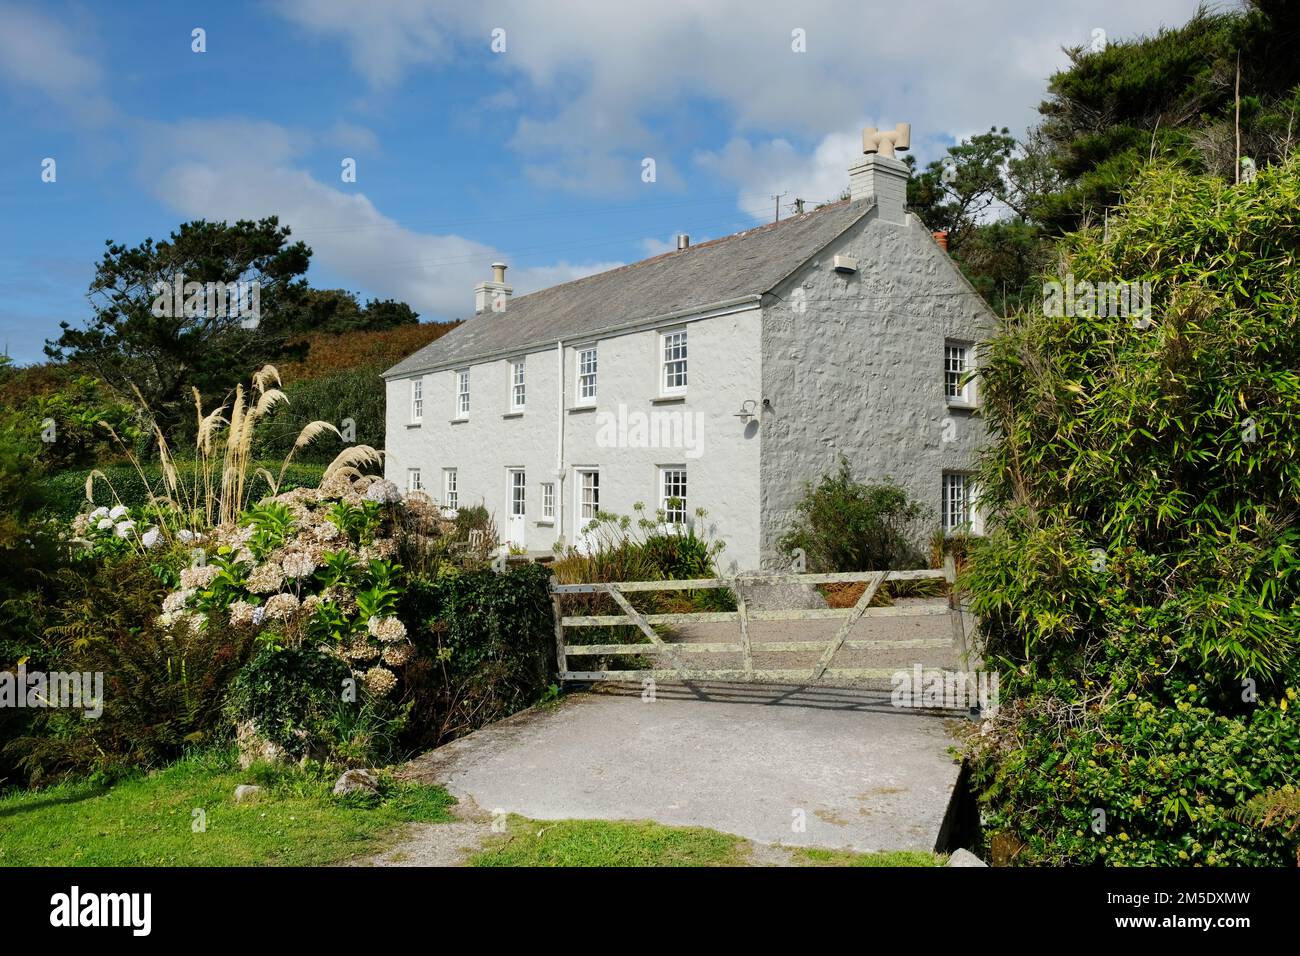 Picturesque Cornish country cottage - John Gollop Stock Photo